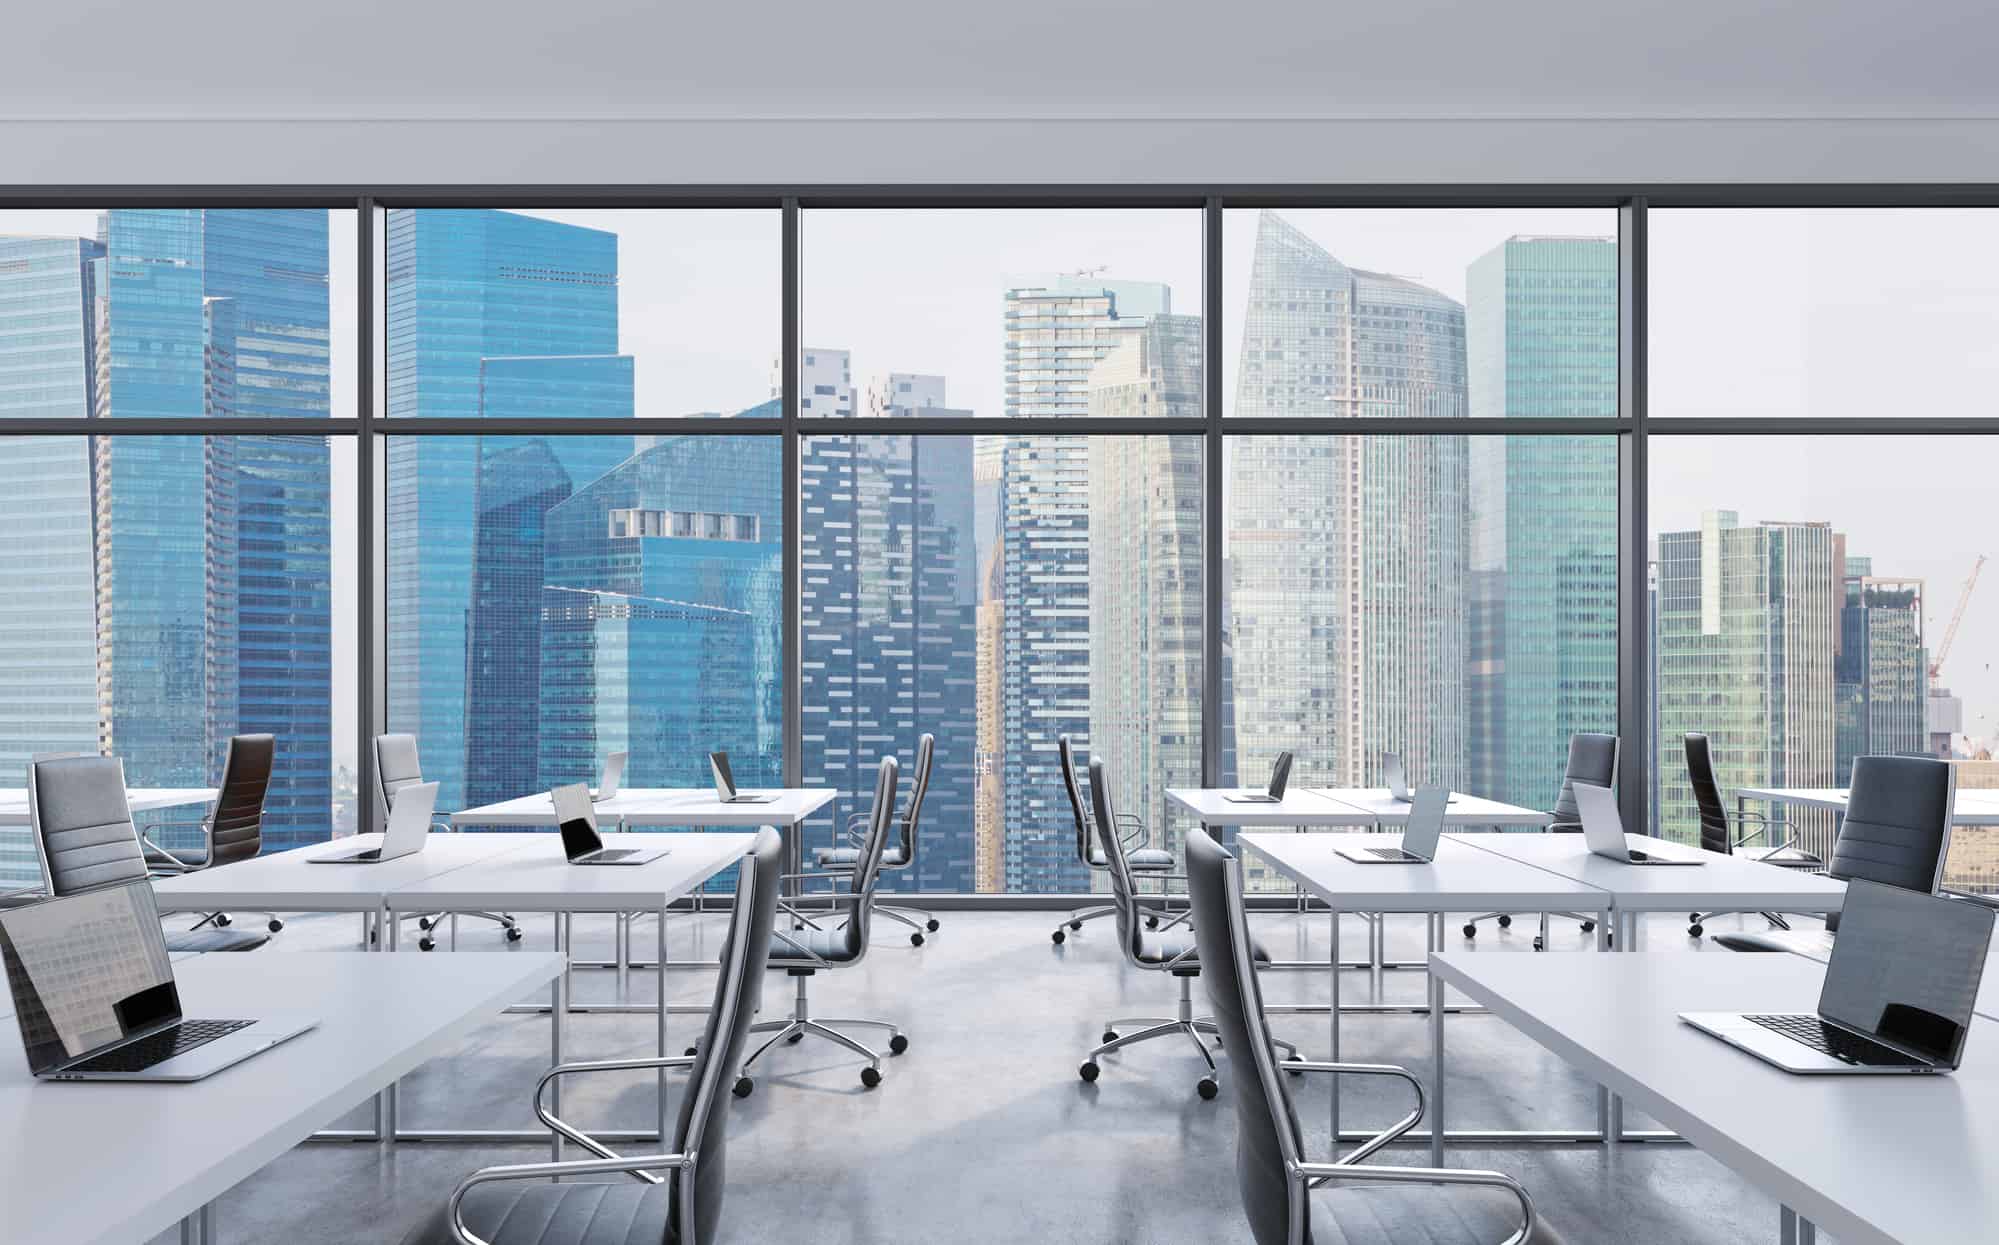 Modern office space with rows of white desks and laptops, owned by CEOs, overlooking a cityscape with skyscrapers through large windows.